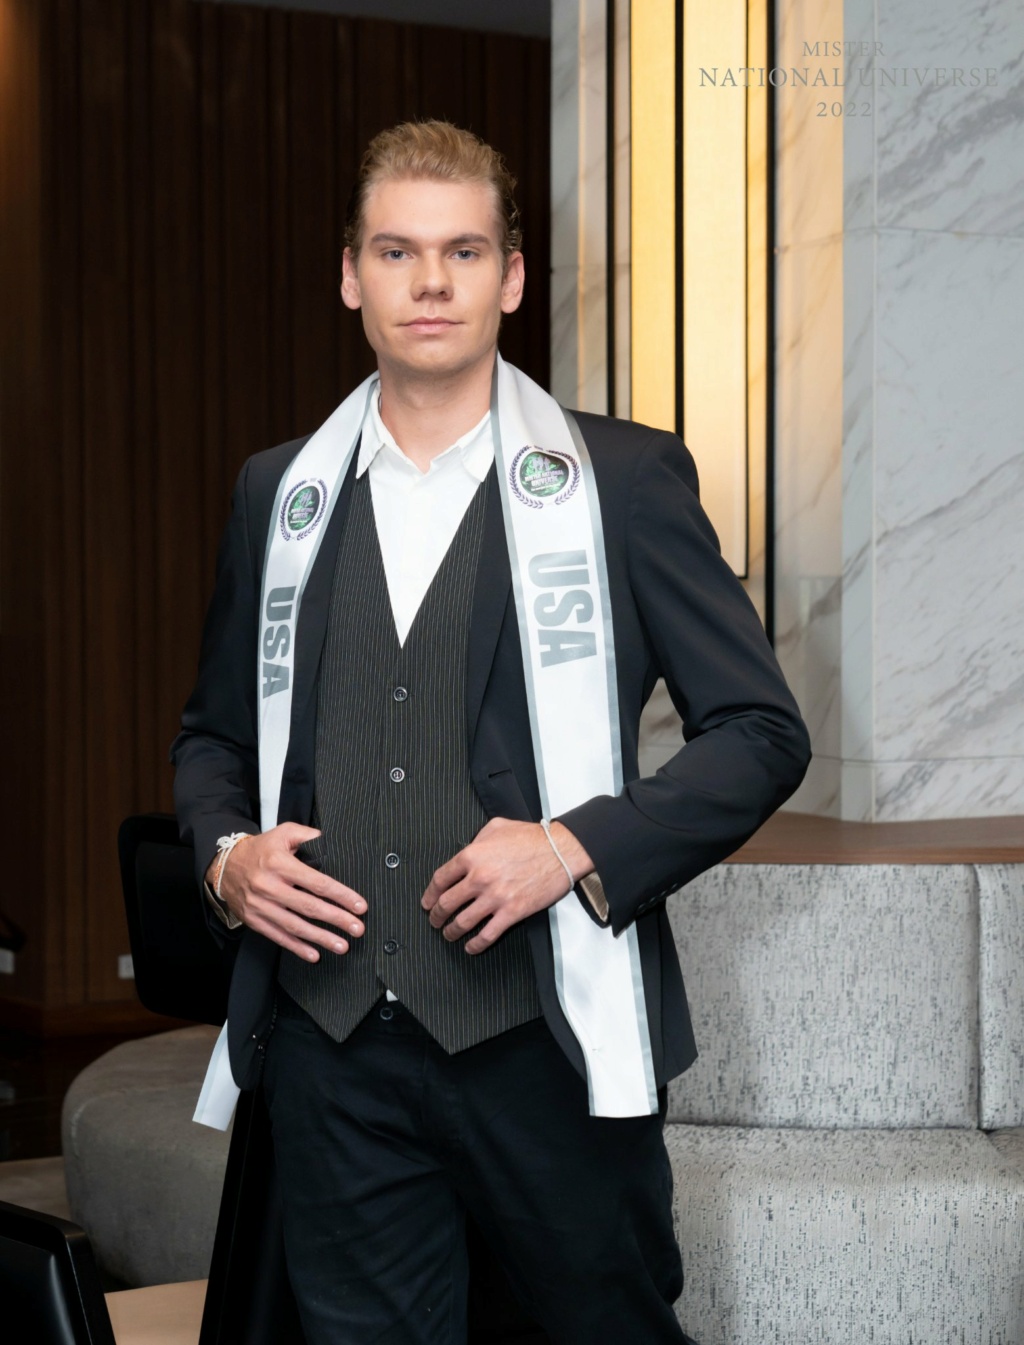 Mister National Universe 2022 is Việt Hoàng from Vietnam 28493811